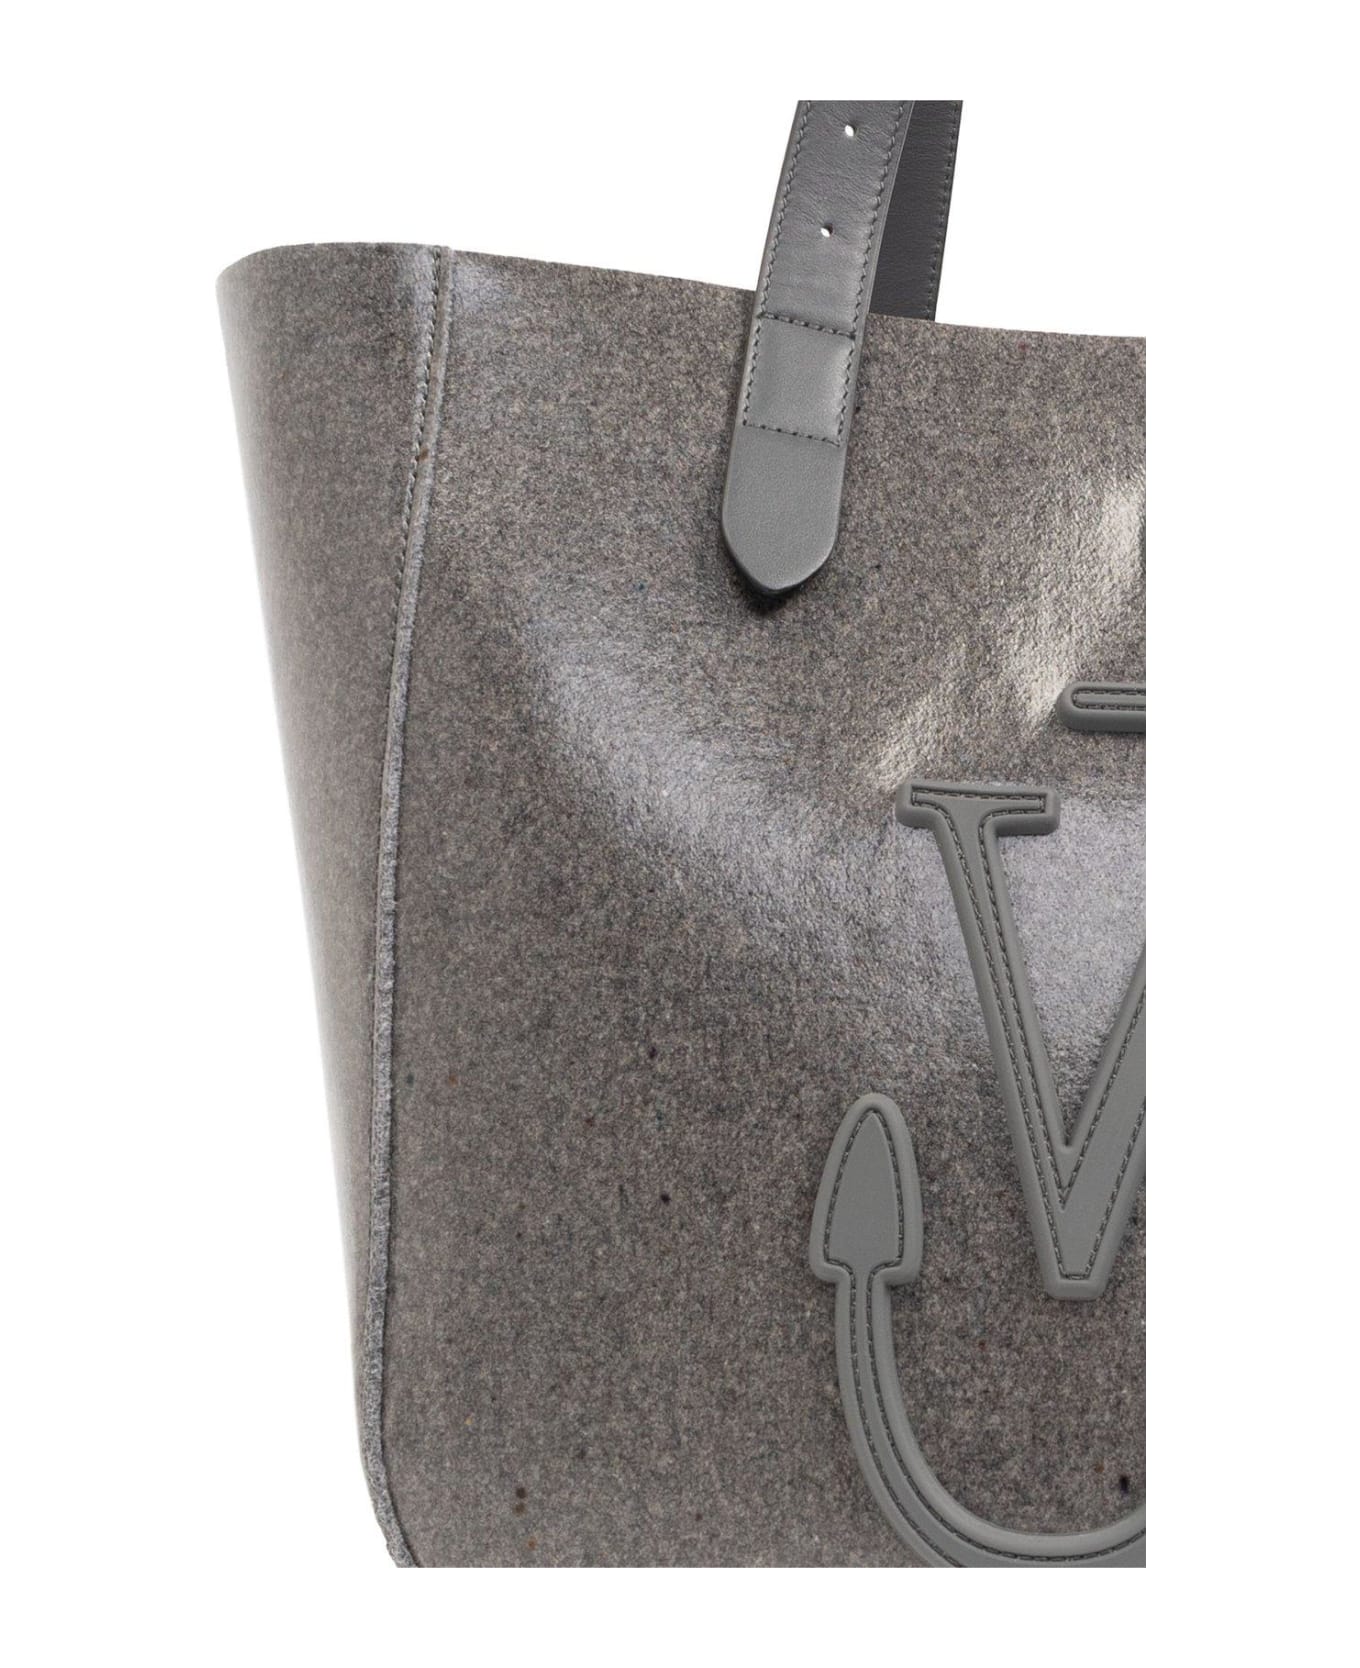 J.W. Anderson Belt Anchor Patch Tote Bag - GREY トートバッグ